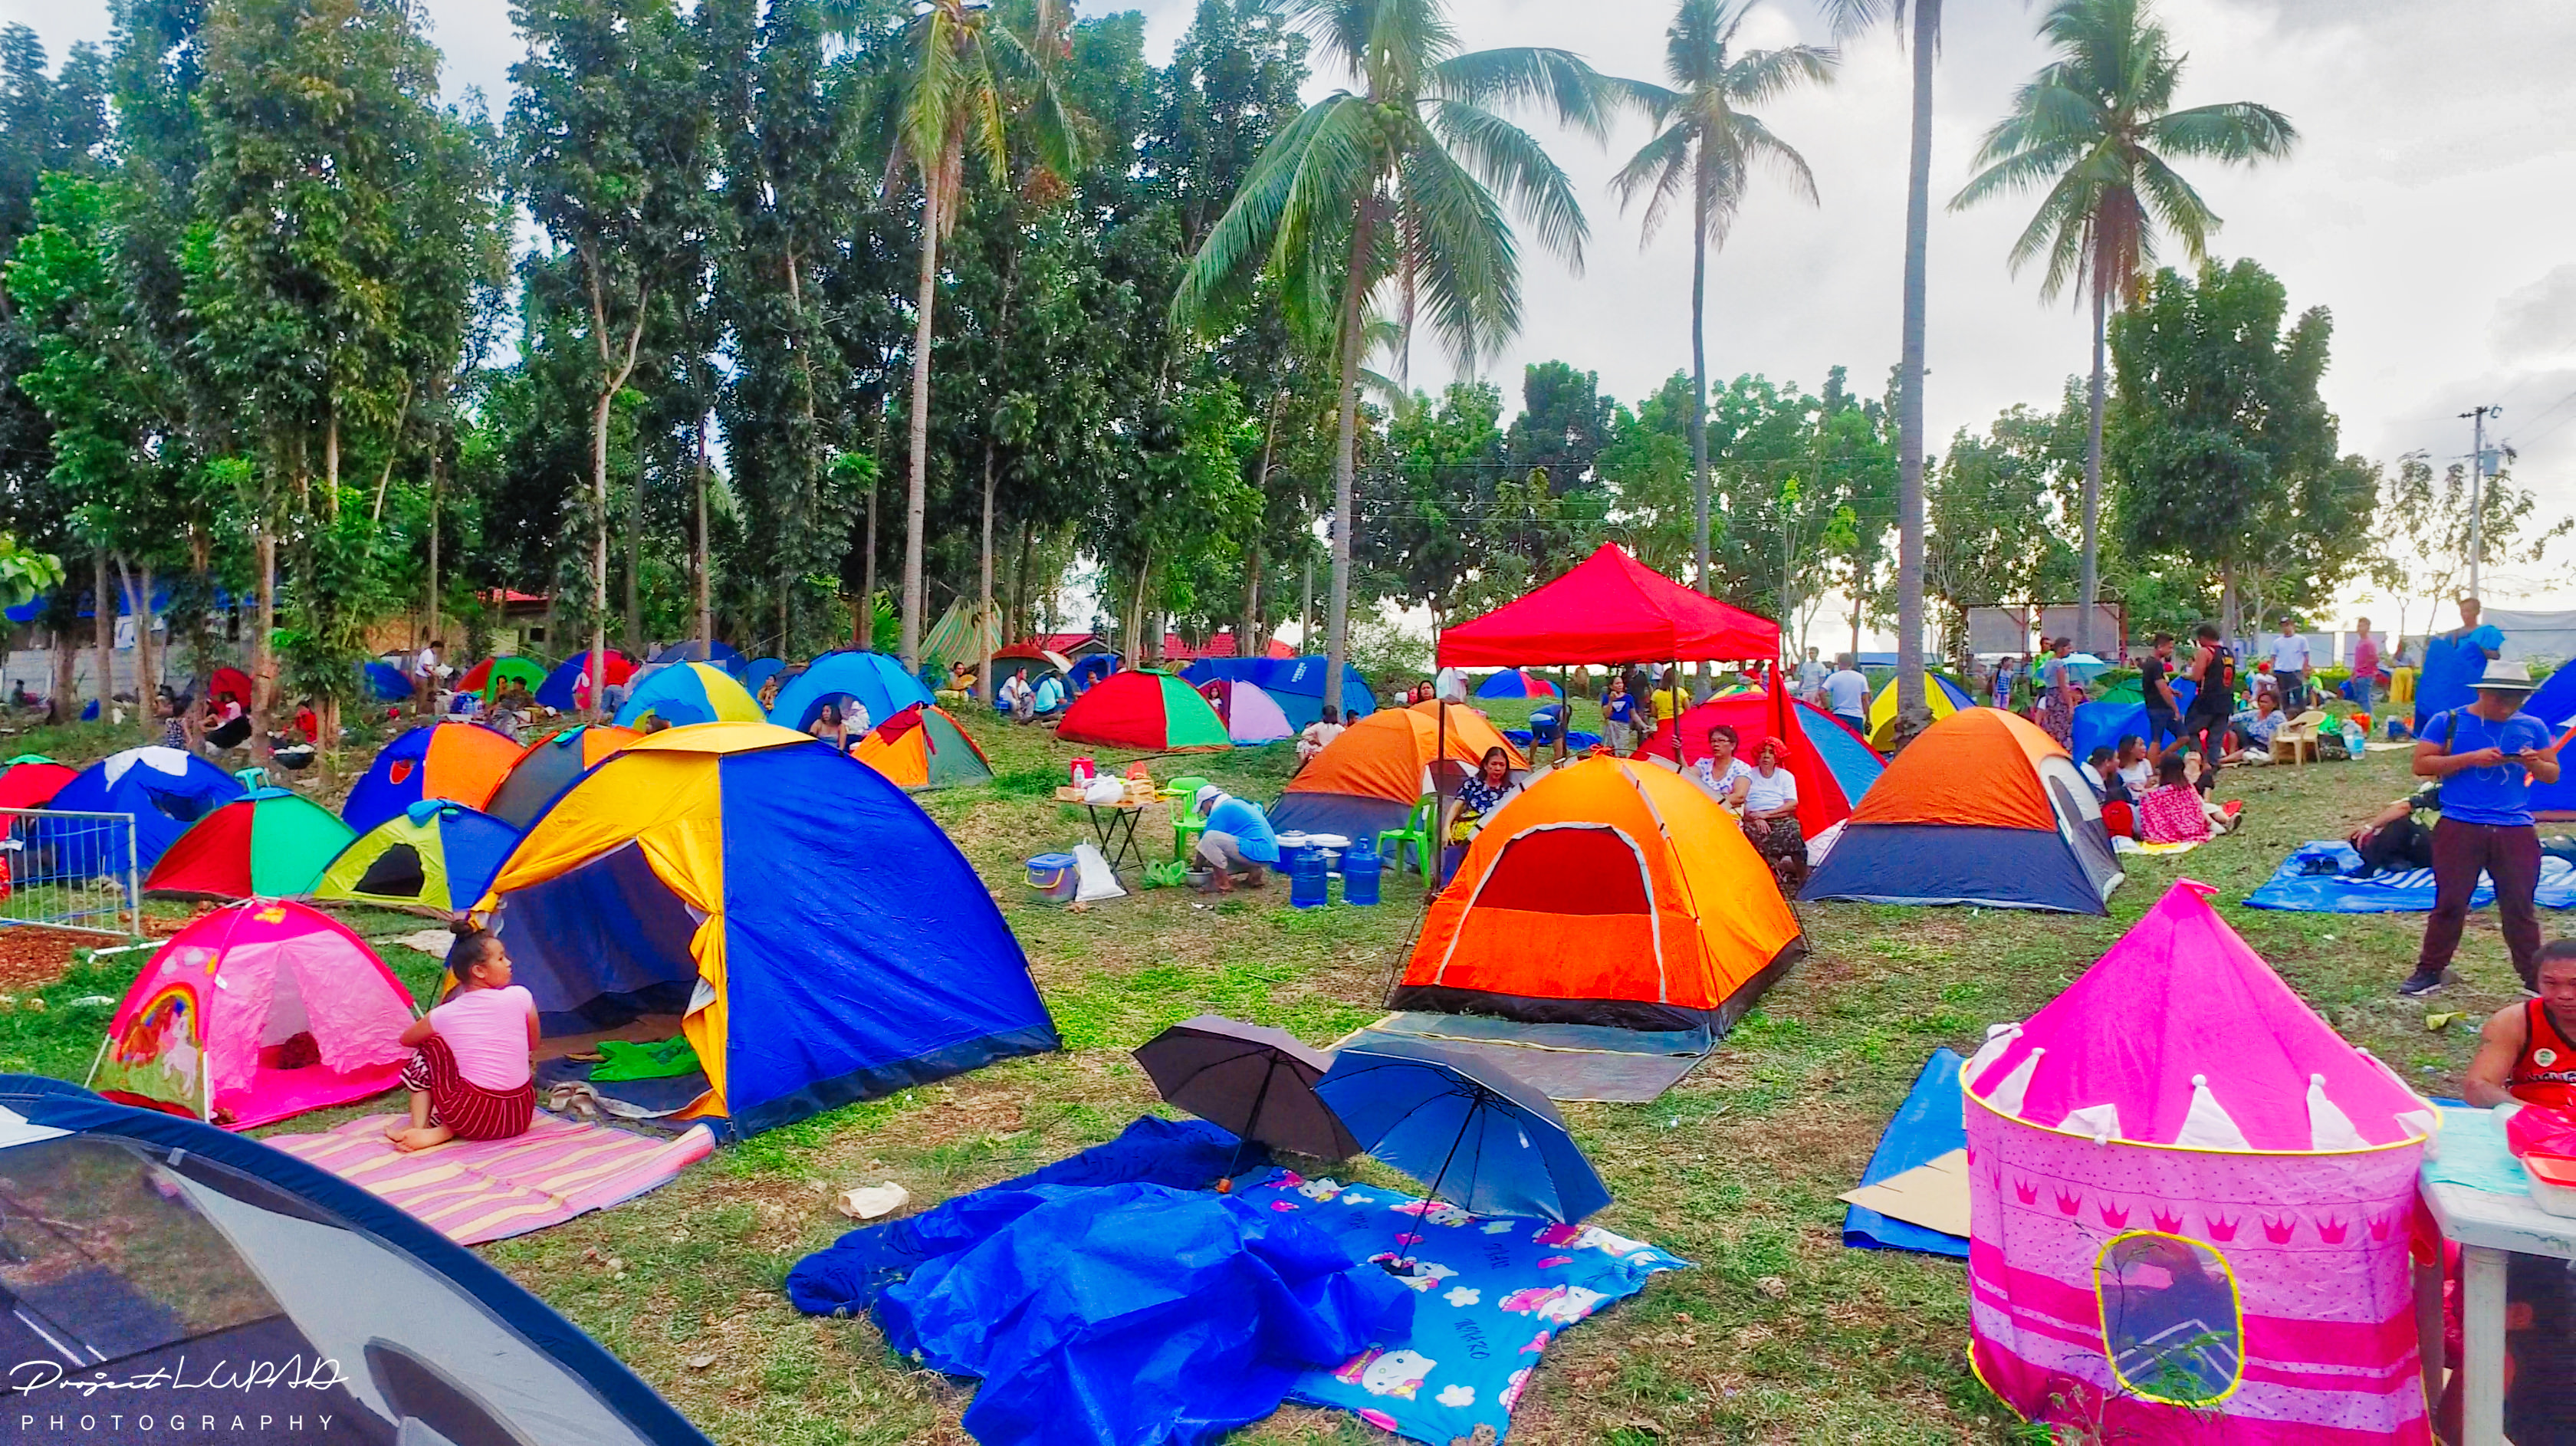 Pilgrims and their tents/camping areas/pilgrims in all areas scattered around.